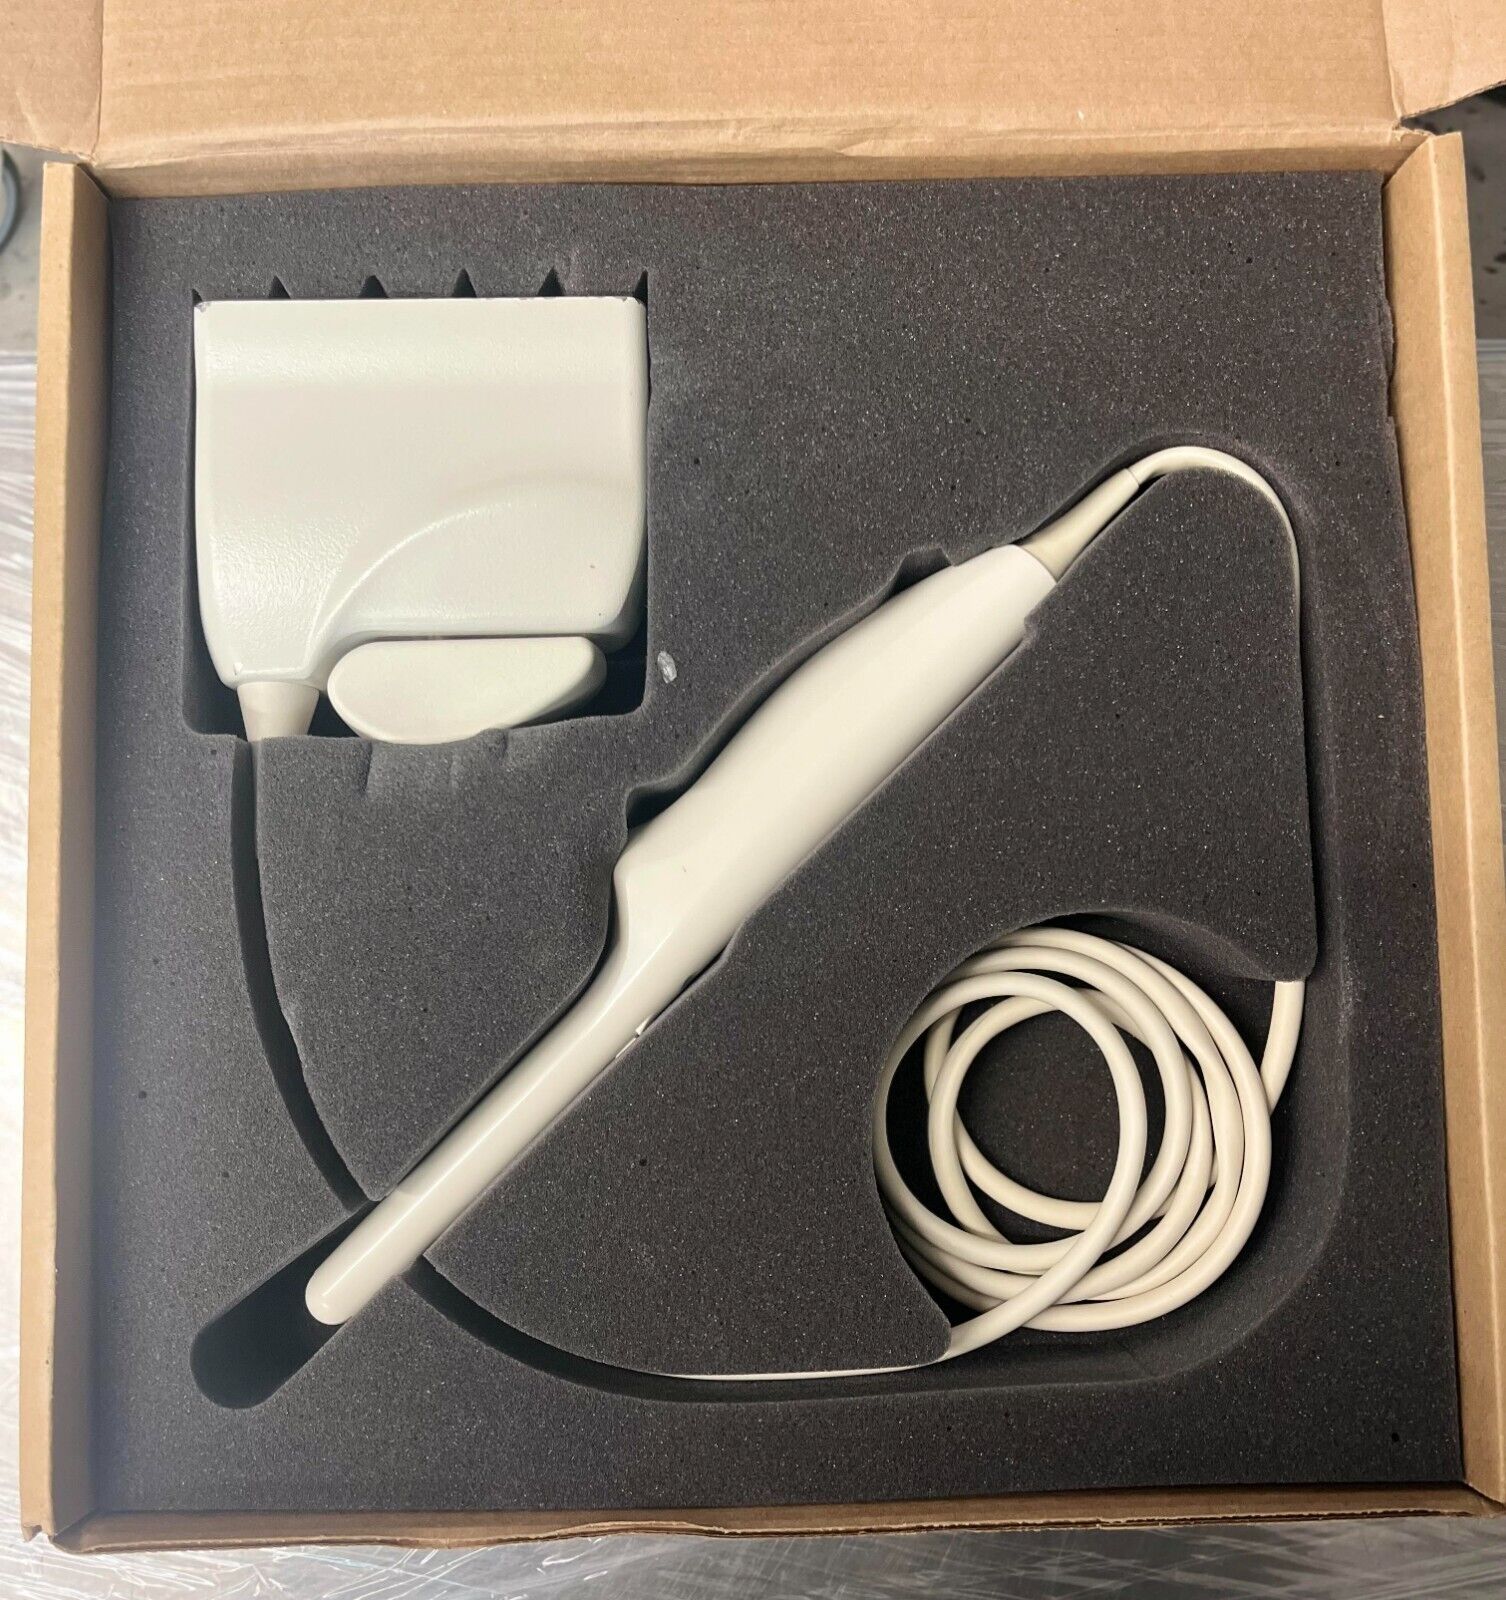 PHILIPS C9-5ec Ultrasound TRANSVAGINAL Probe/Transducer - Great Condition